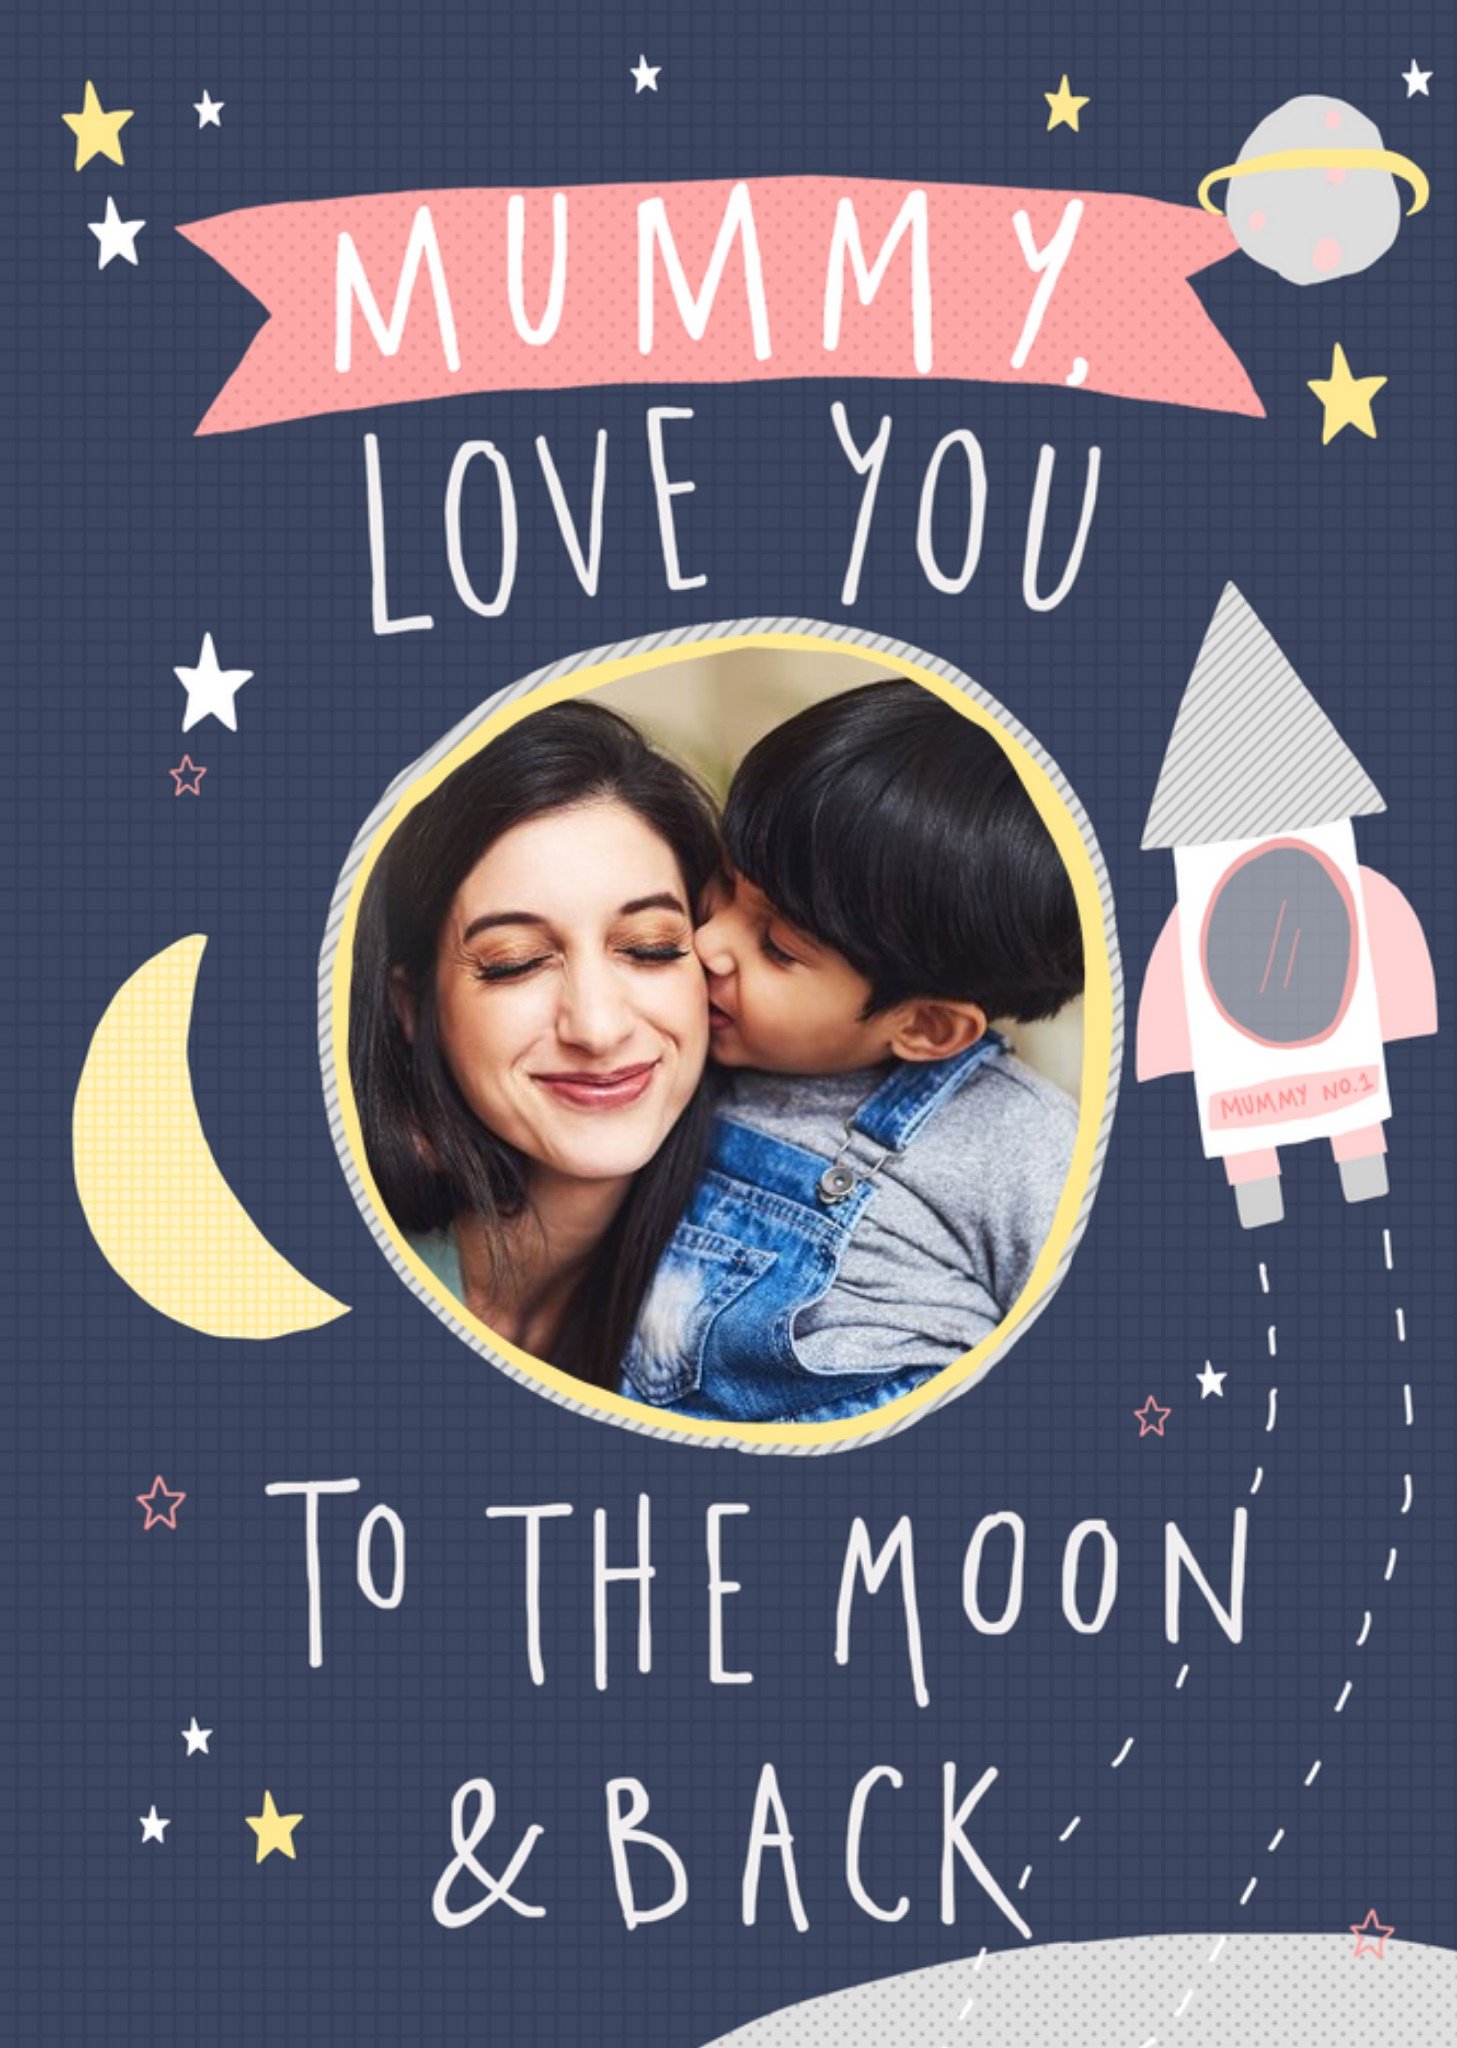 Moonpig Mother's Day Card - Mummy - Moon And Back - Photo Upload Card, Large